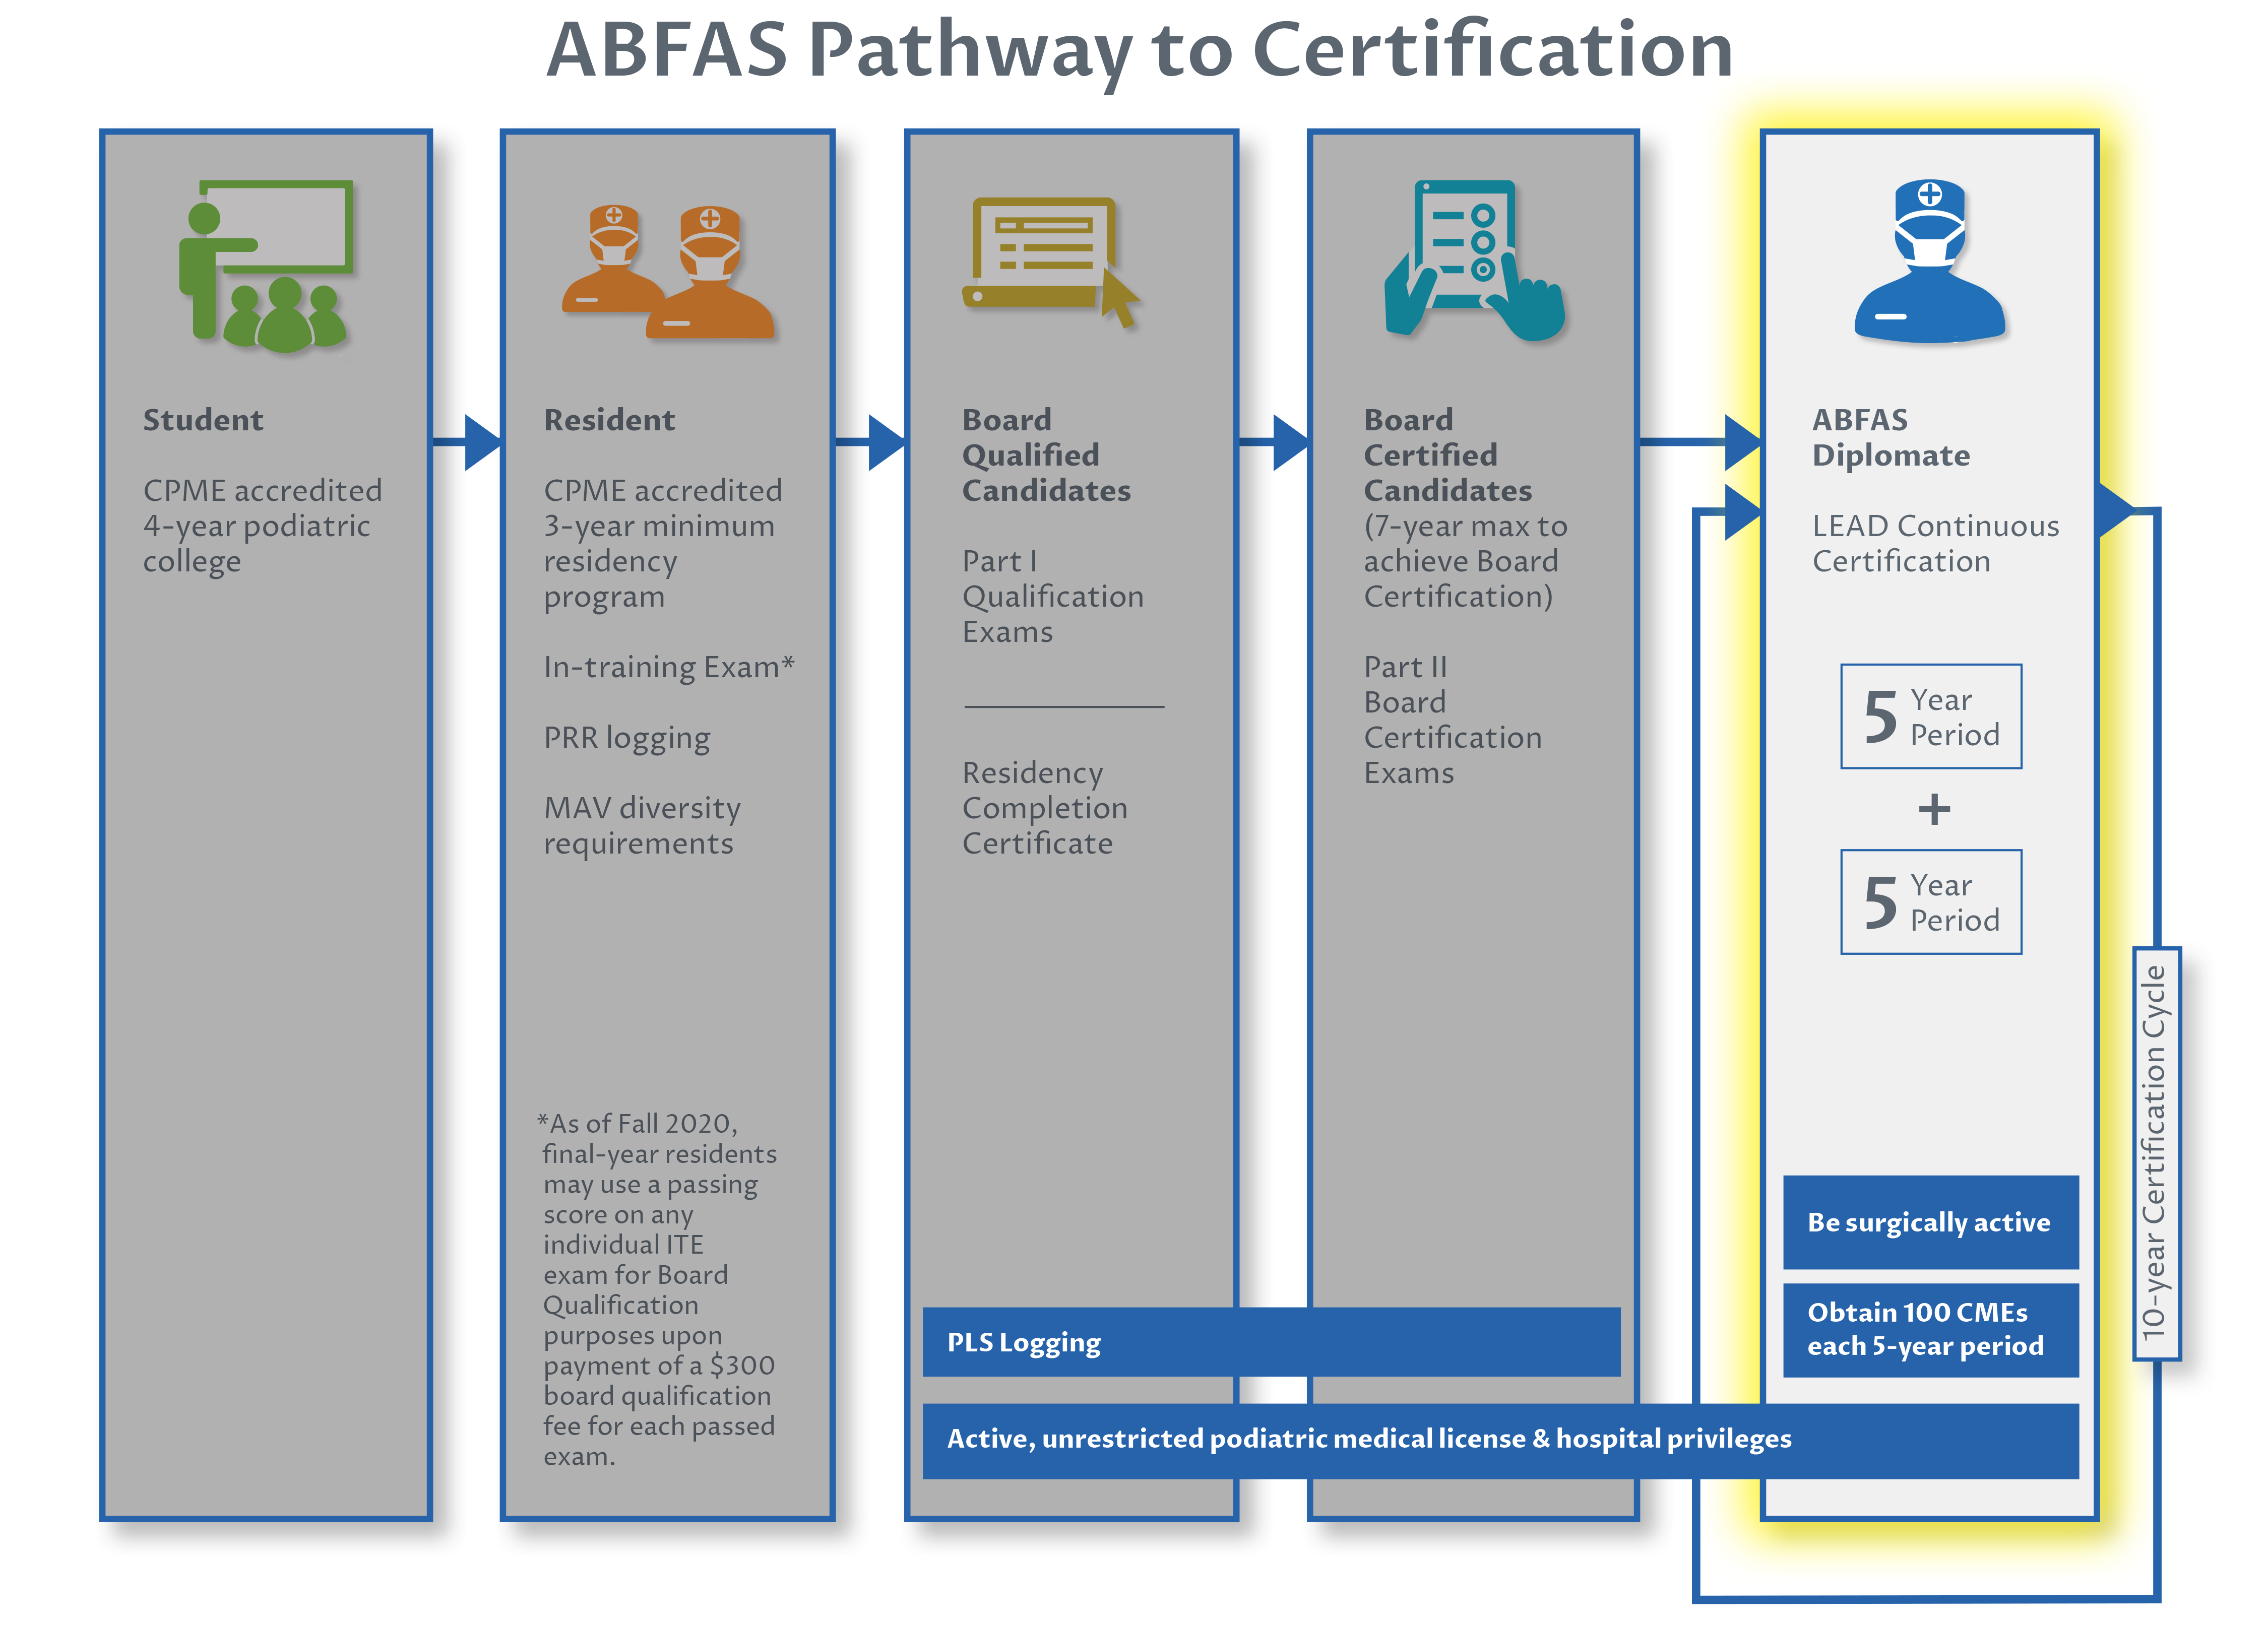 Overview of the ABFAS Pathway to Certification